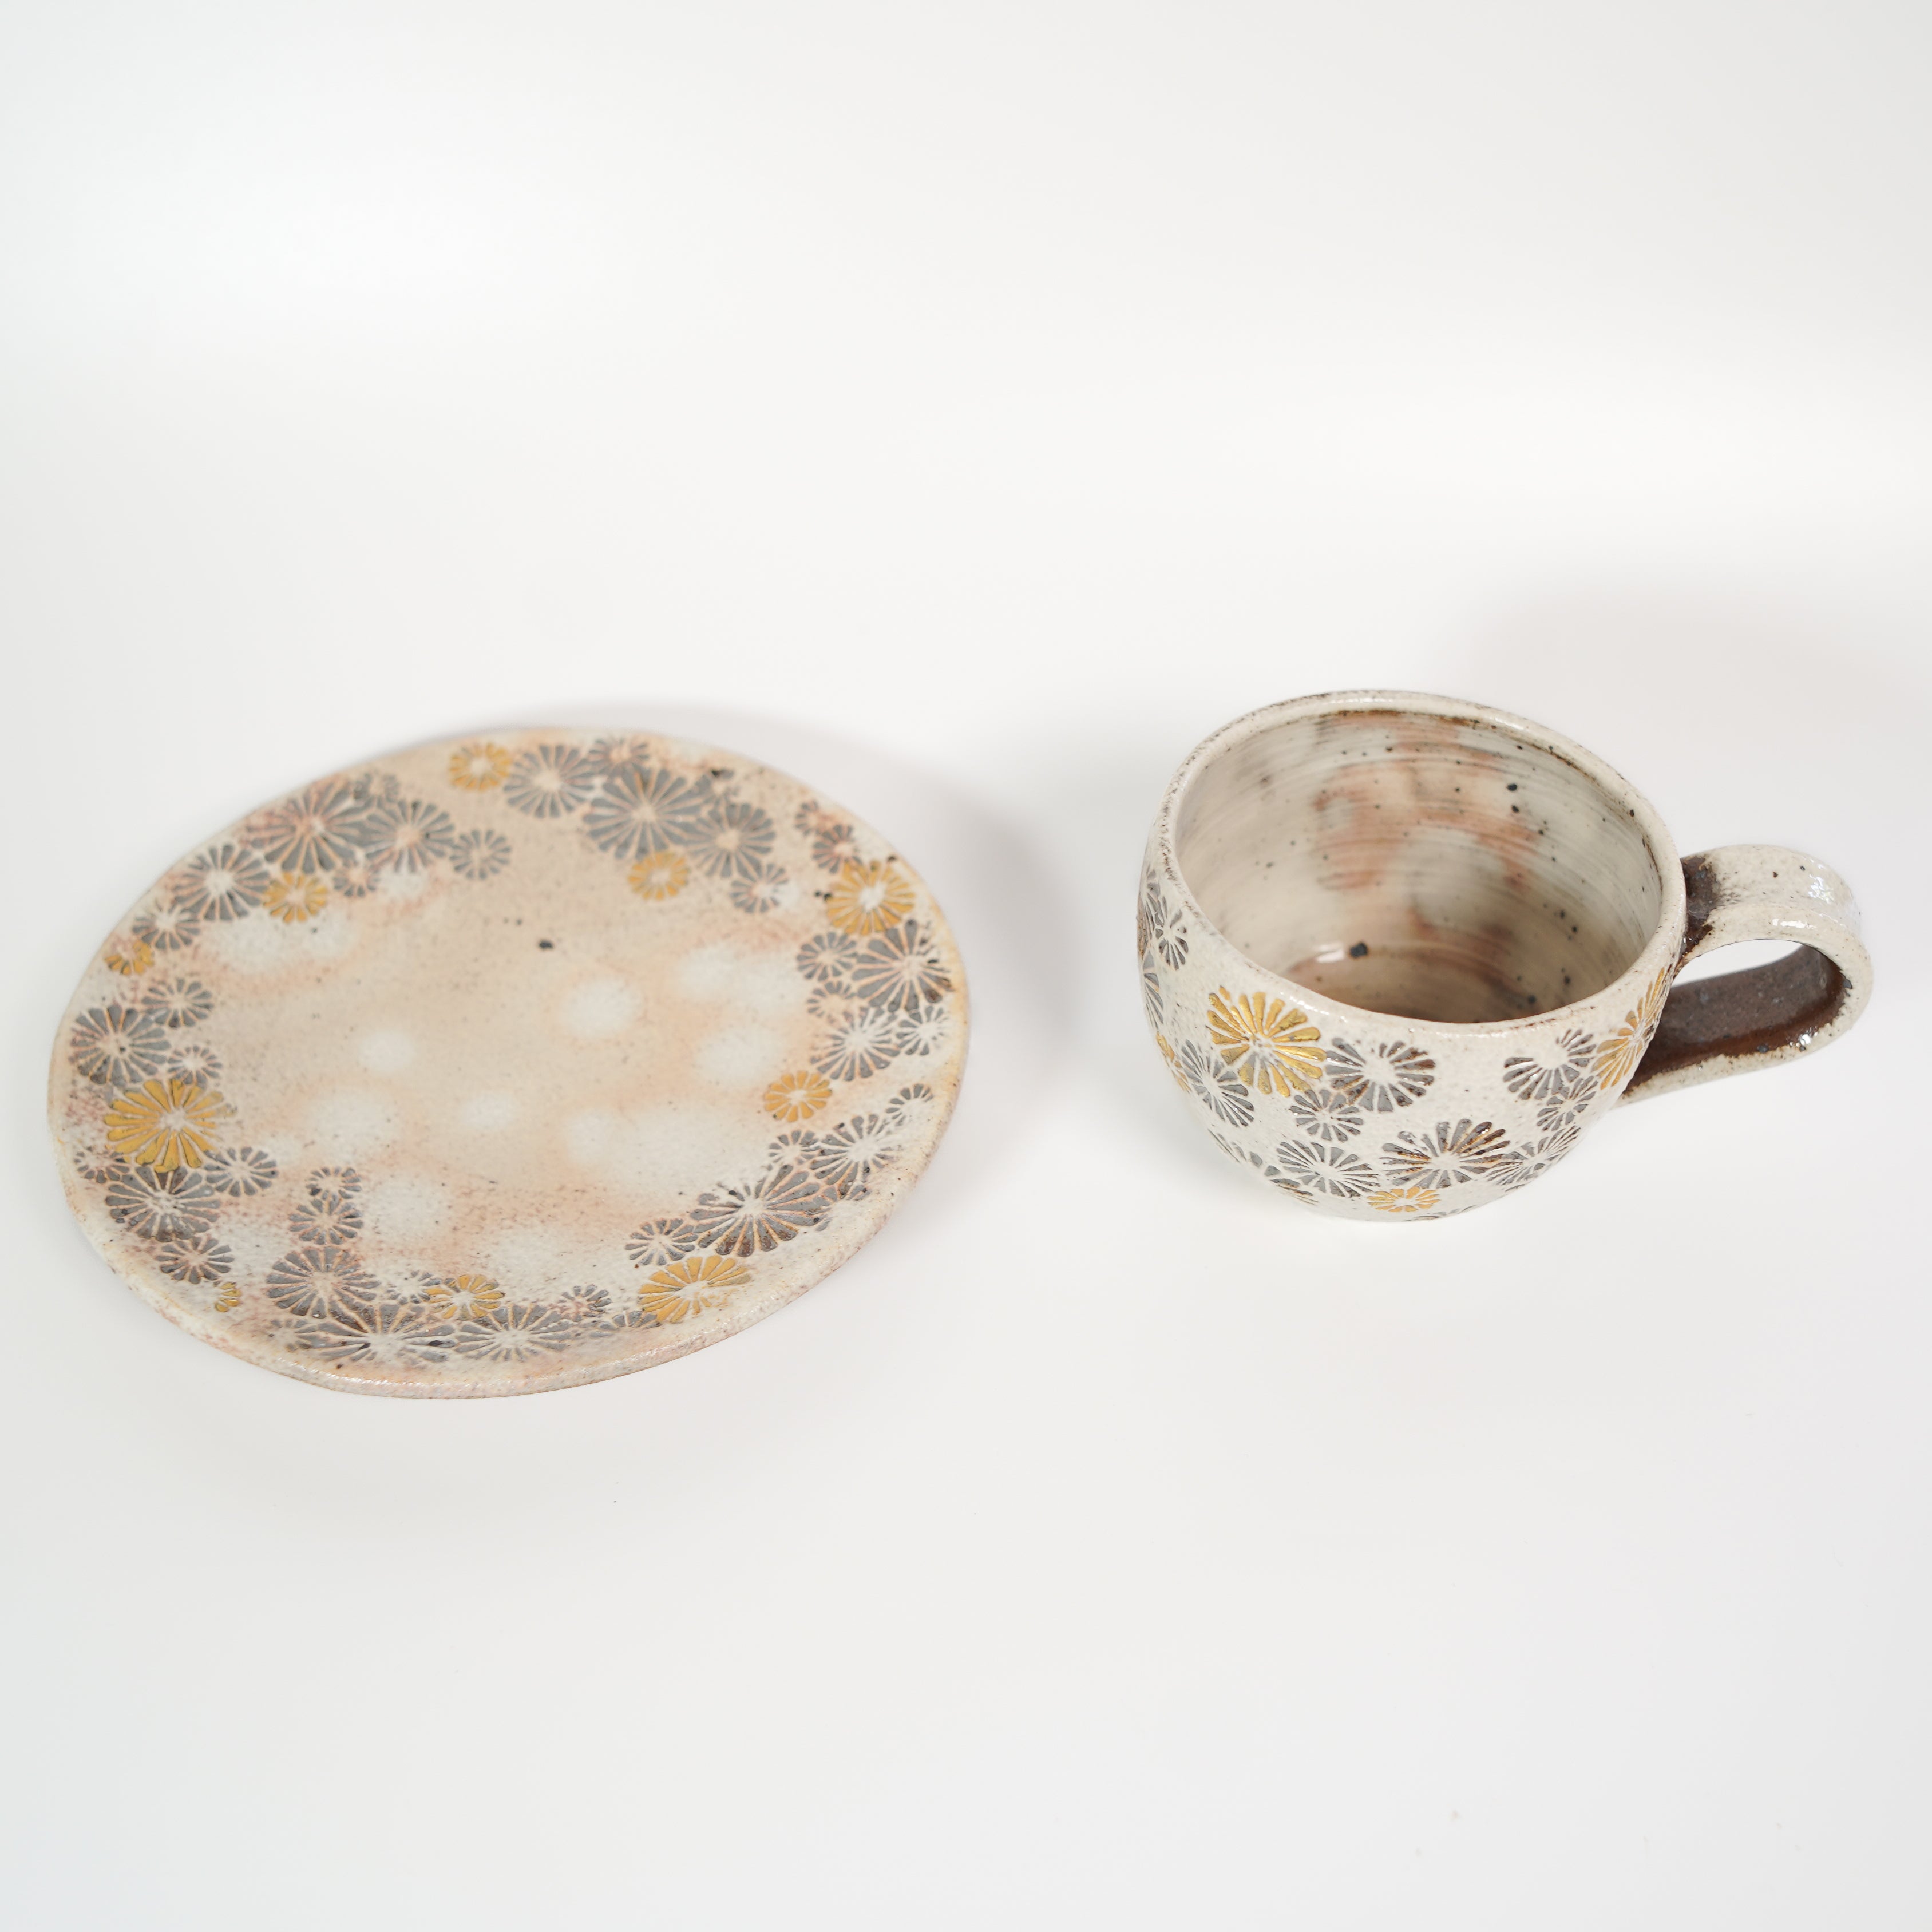 Mishima Golden Overglaze Cup and Saucer - White